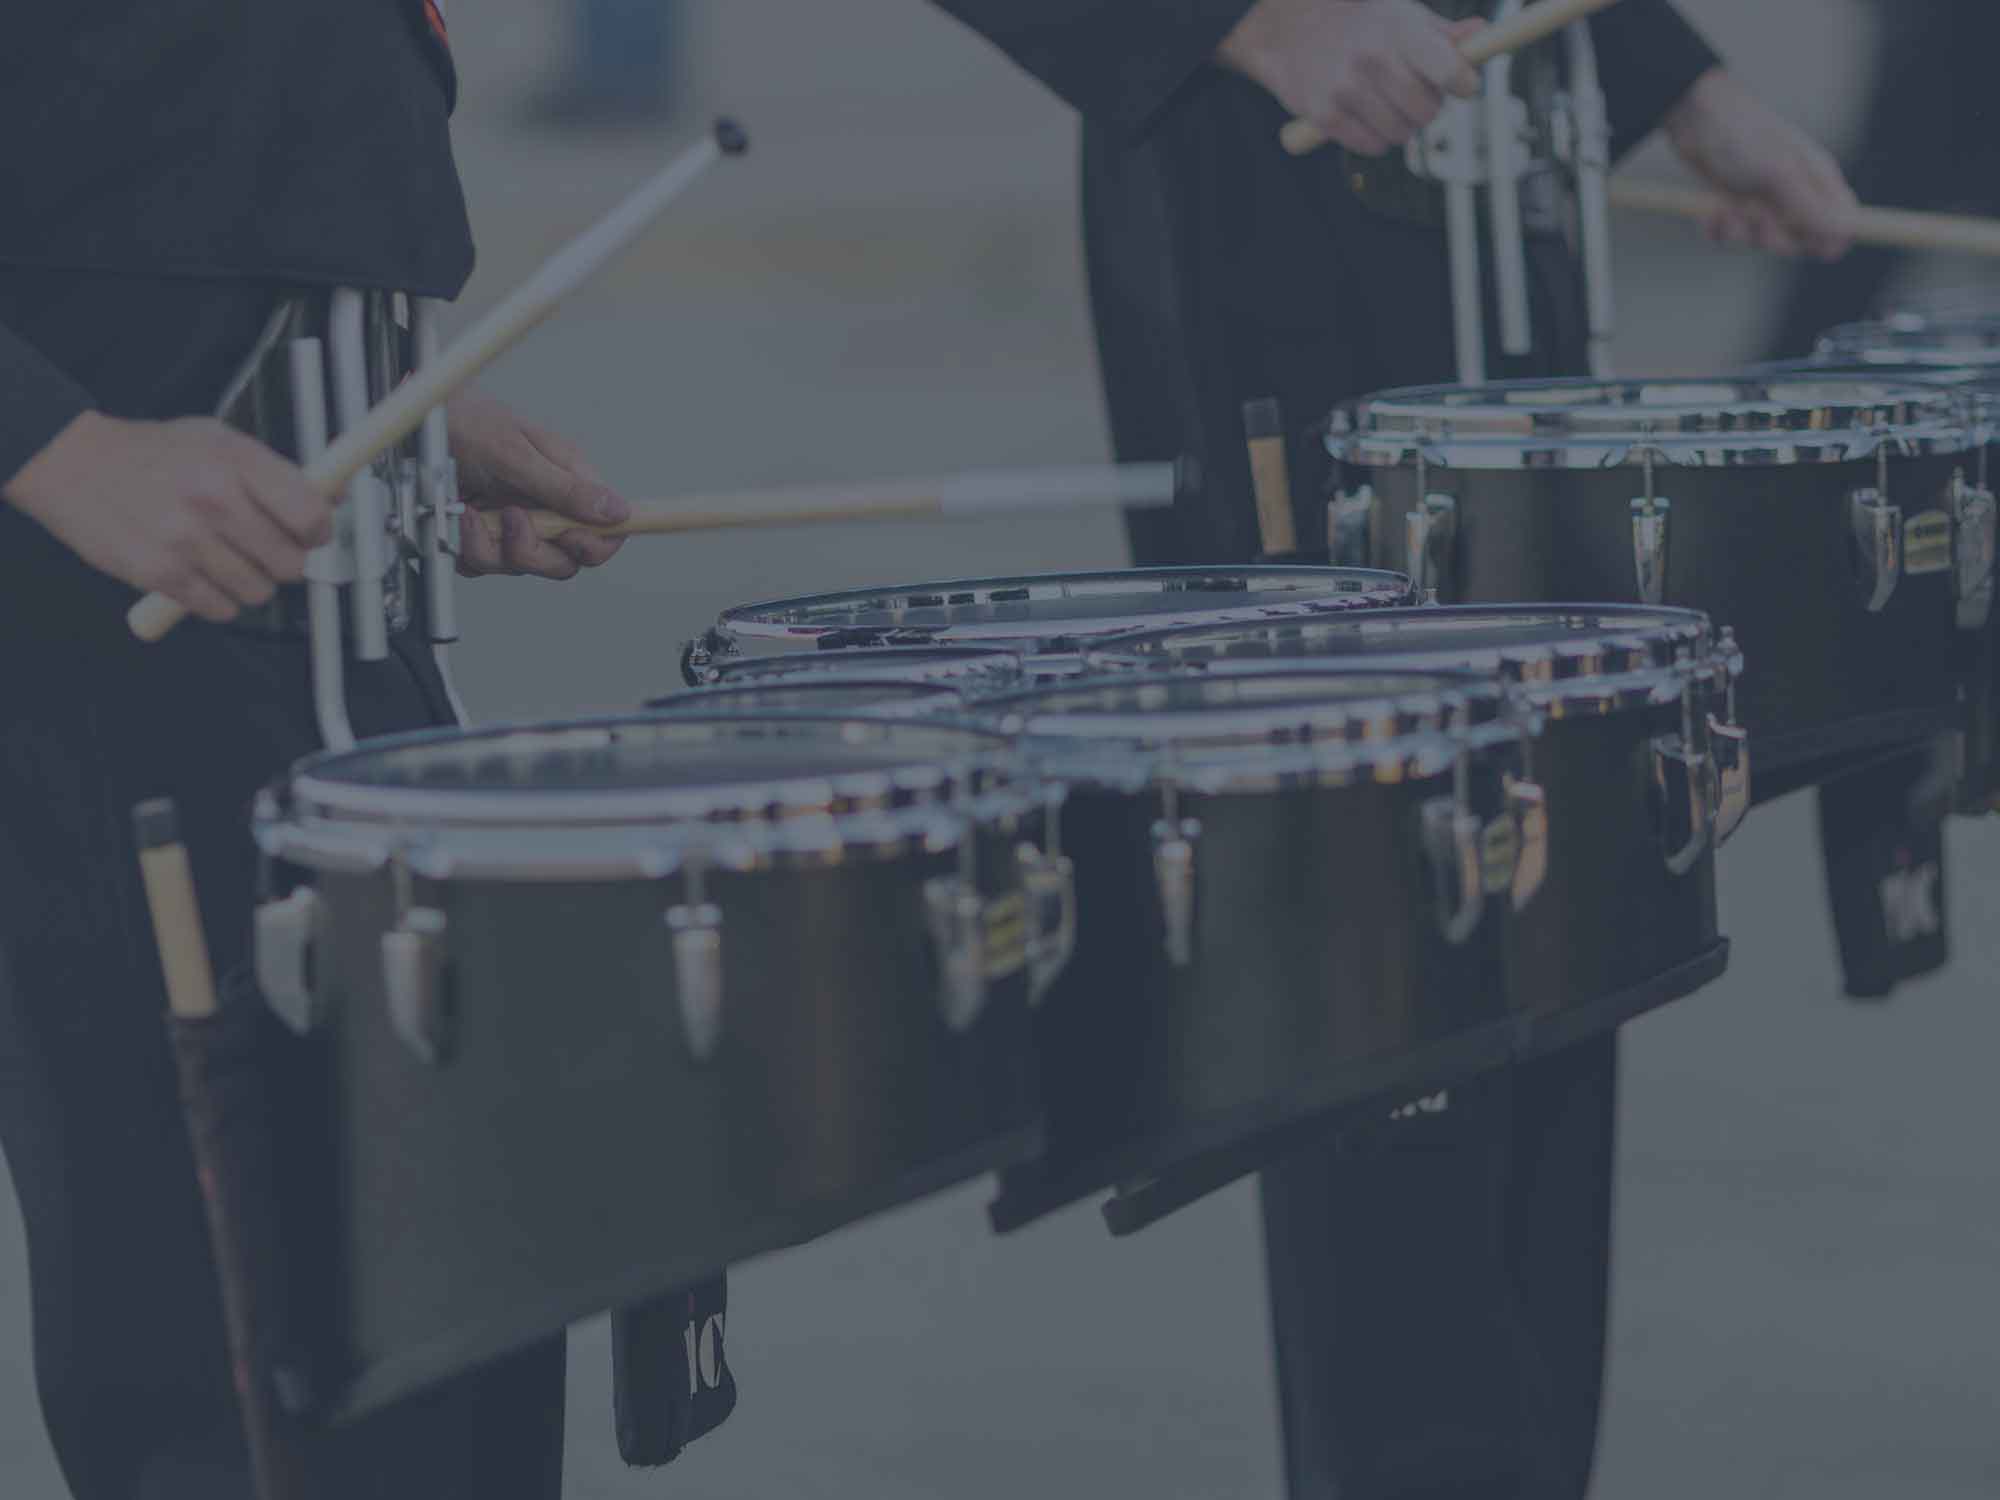 Contact lists – what works for crowdfunding and marching band fundraising?